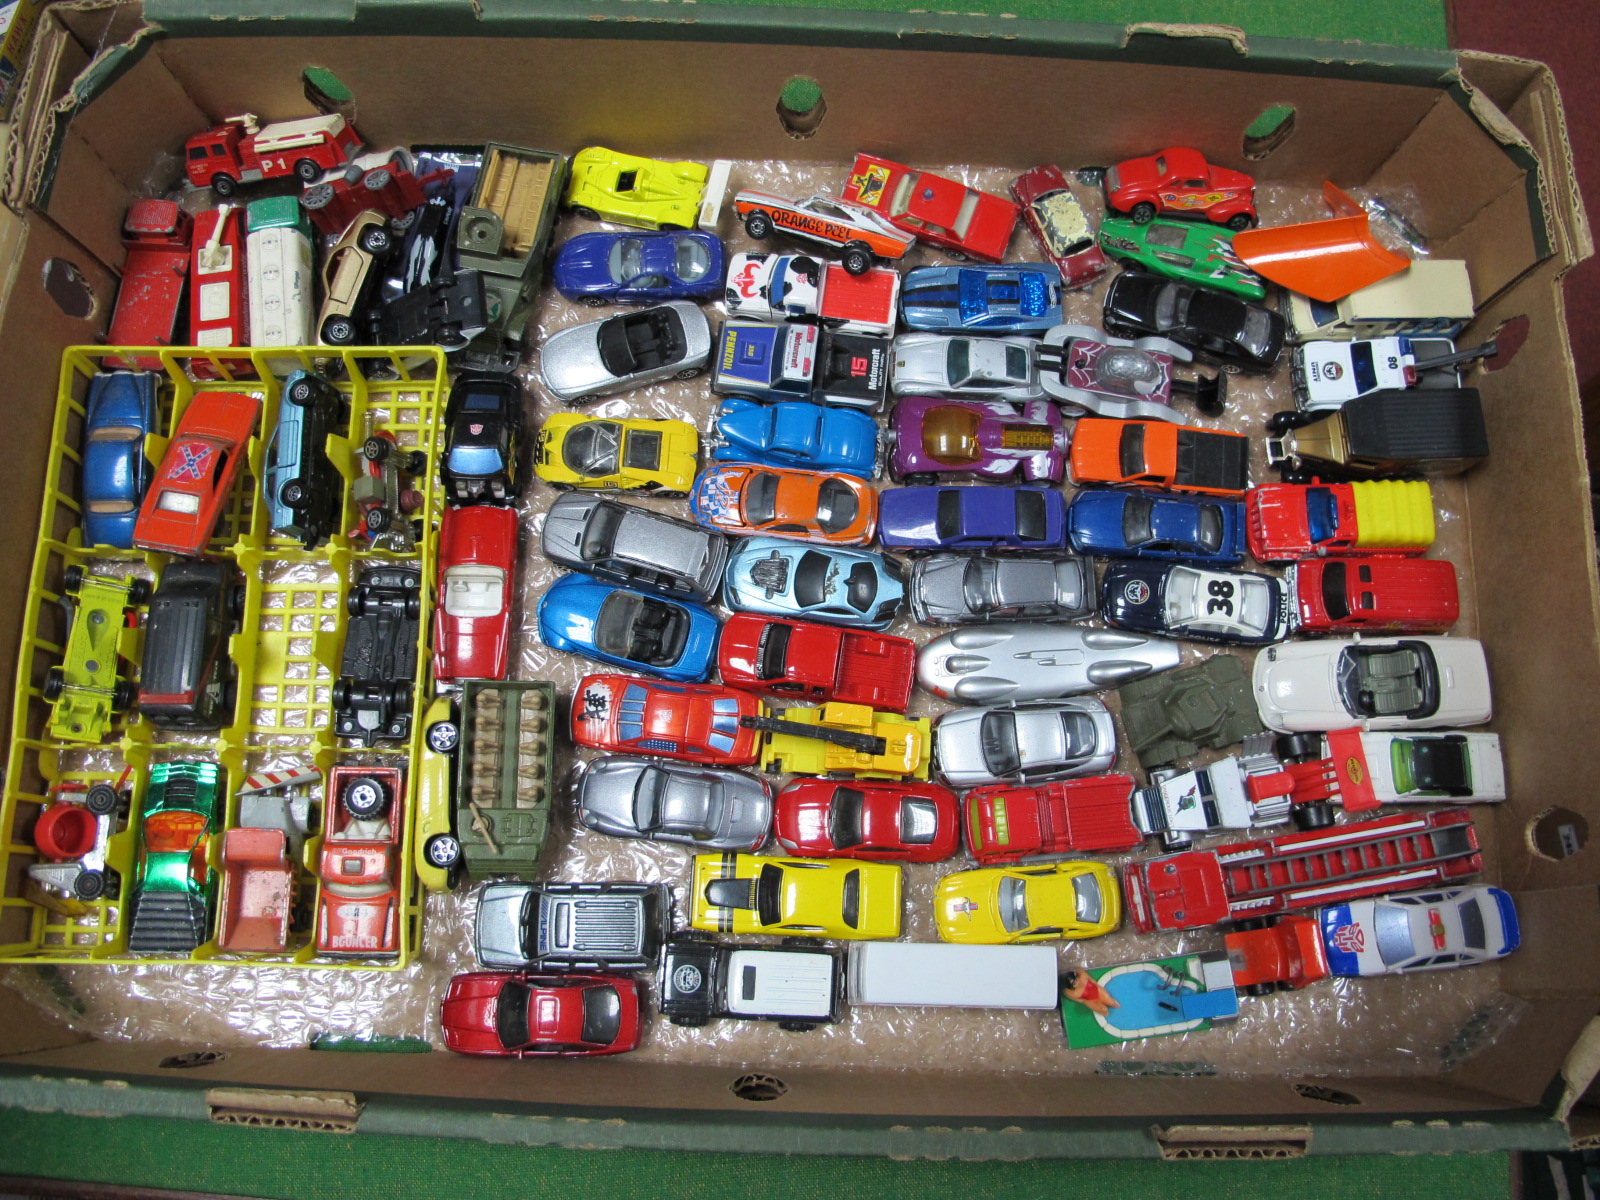 A Quantity of Diecast Model Vehicles, by Matchbox, Corgi, Majorette, Ertl and other, playworn.